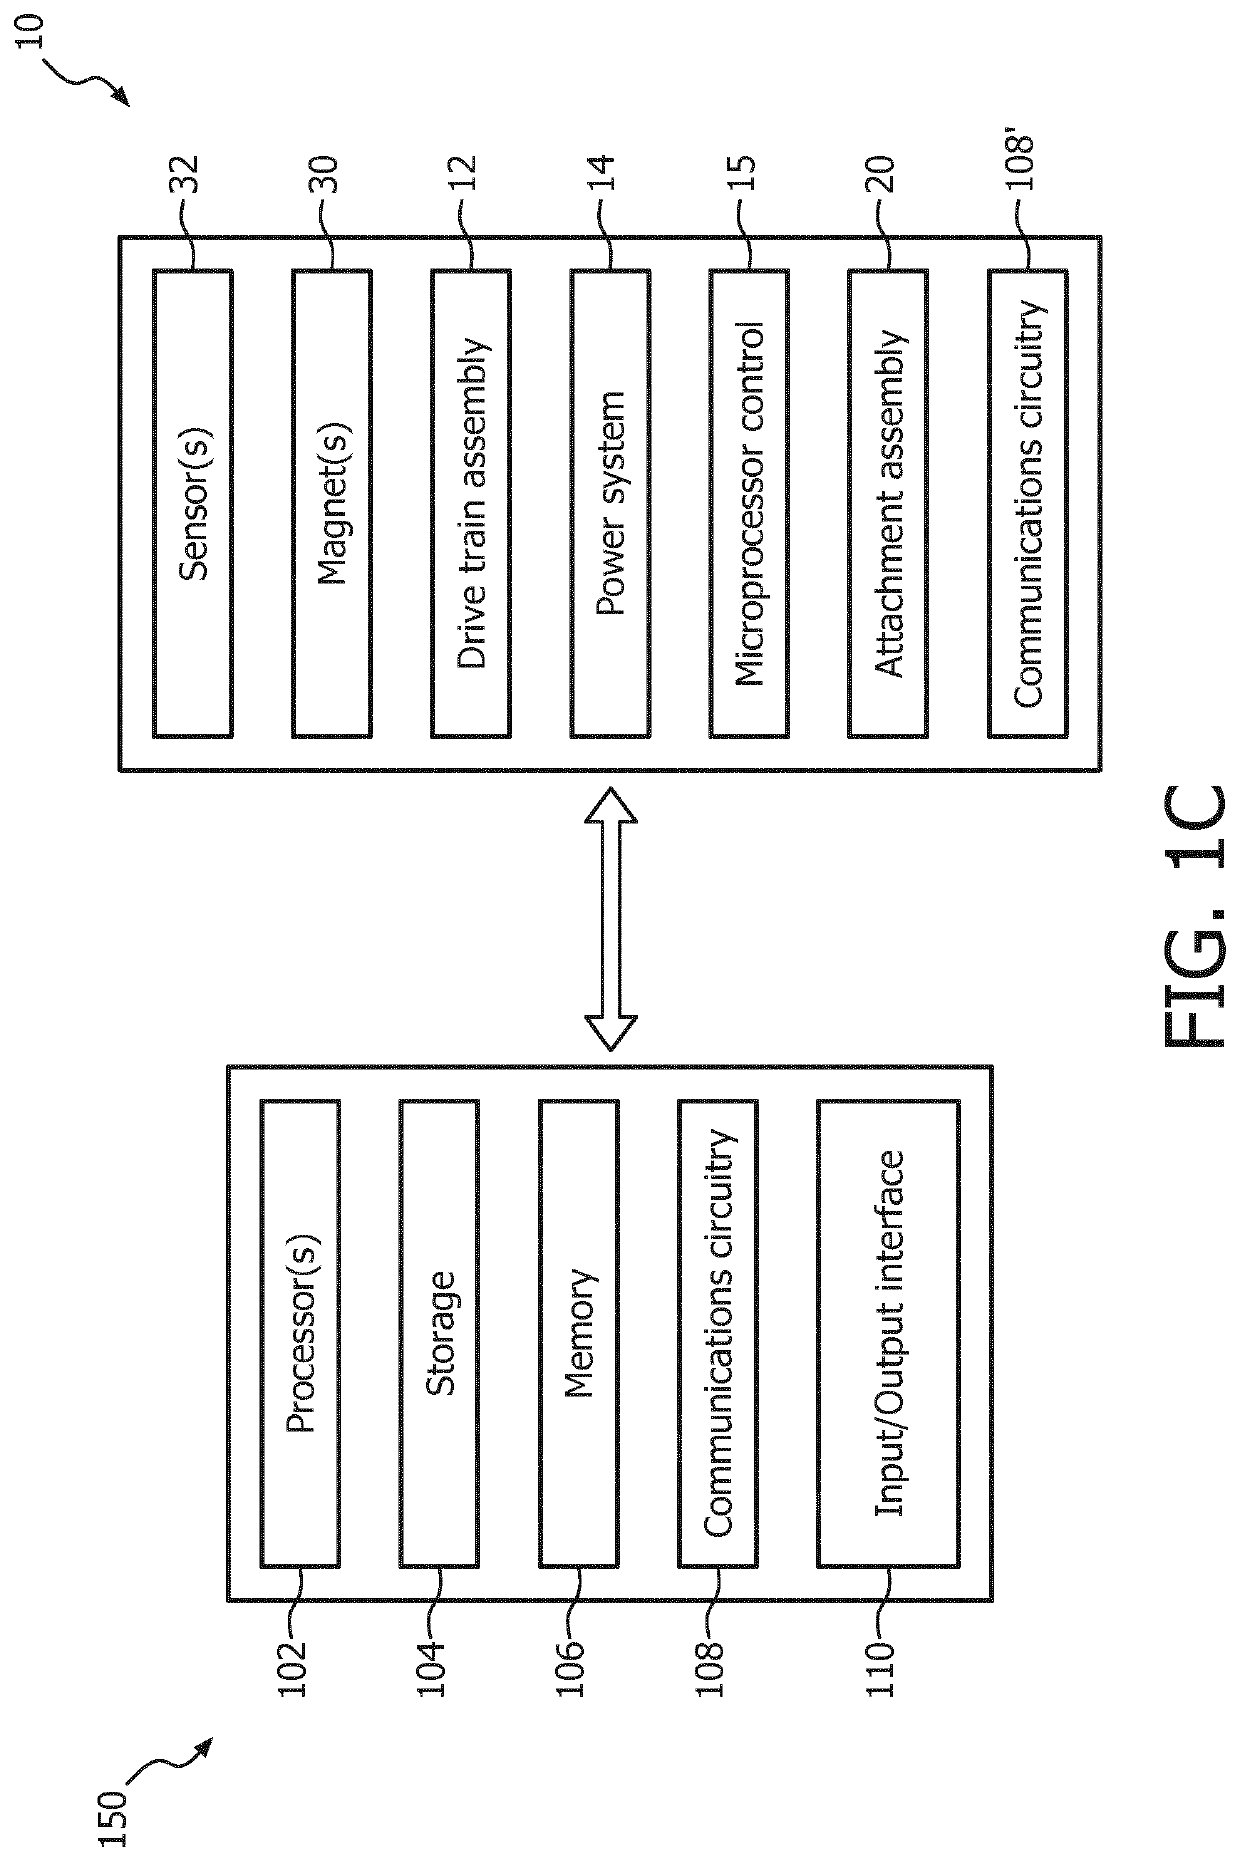 Methods and systems for extracting motion characteristics of a user to provide feedback to a user